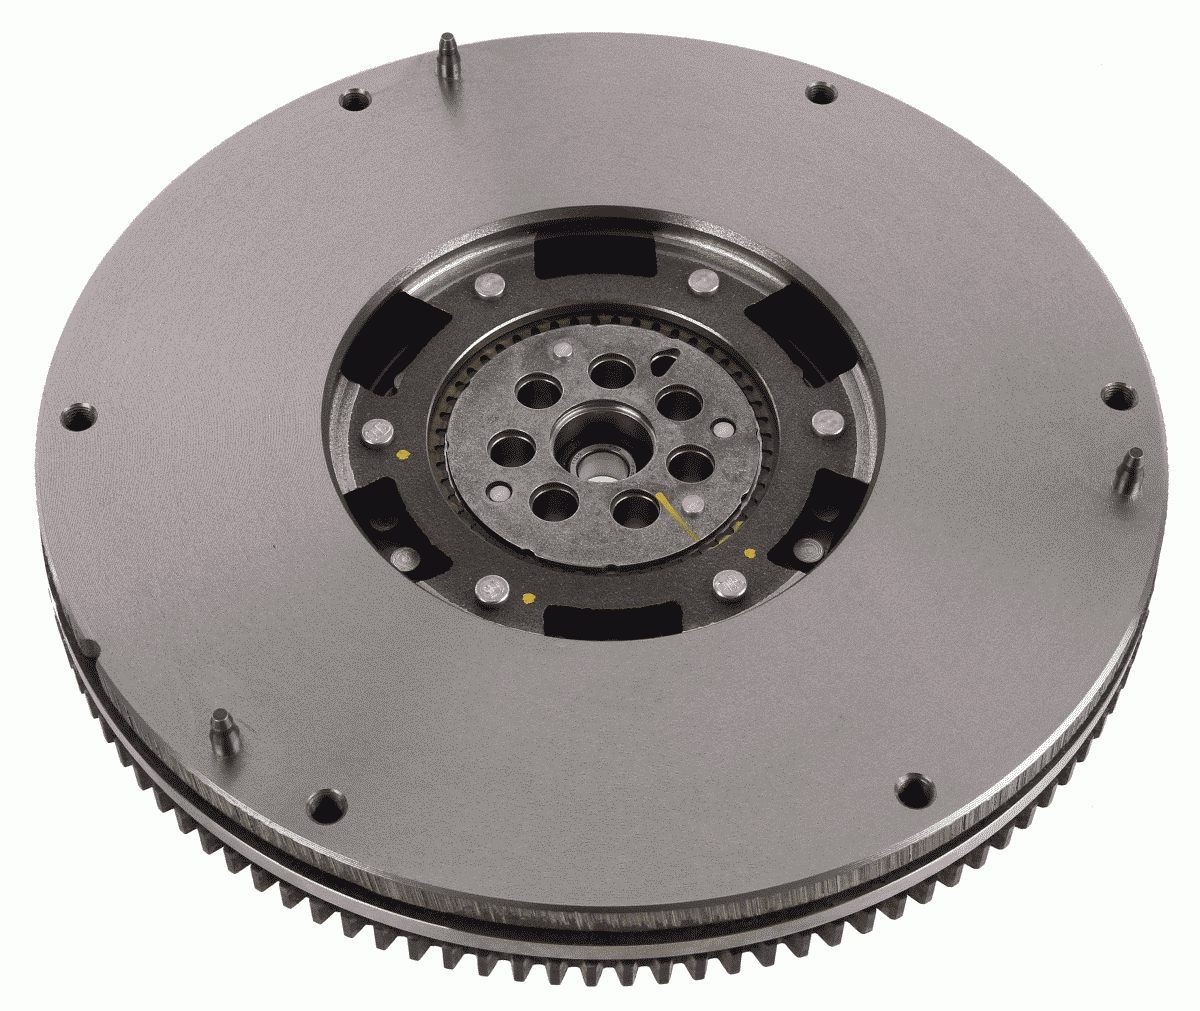 SACHS 2294 501 245 Iveco Daily 2012 Dual mass flywheel